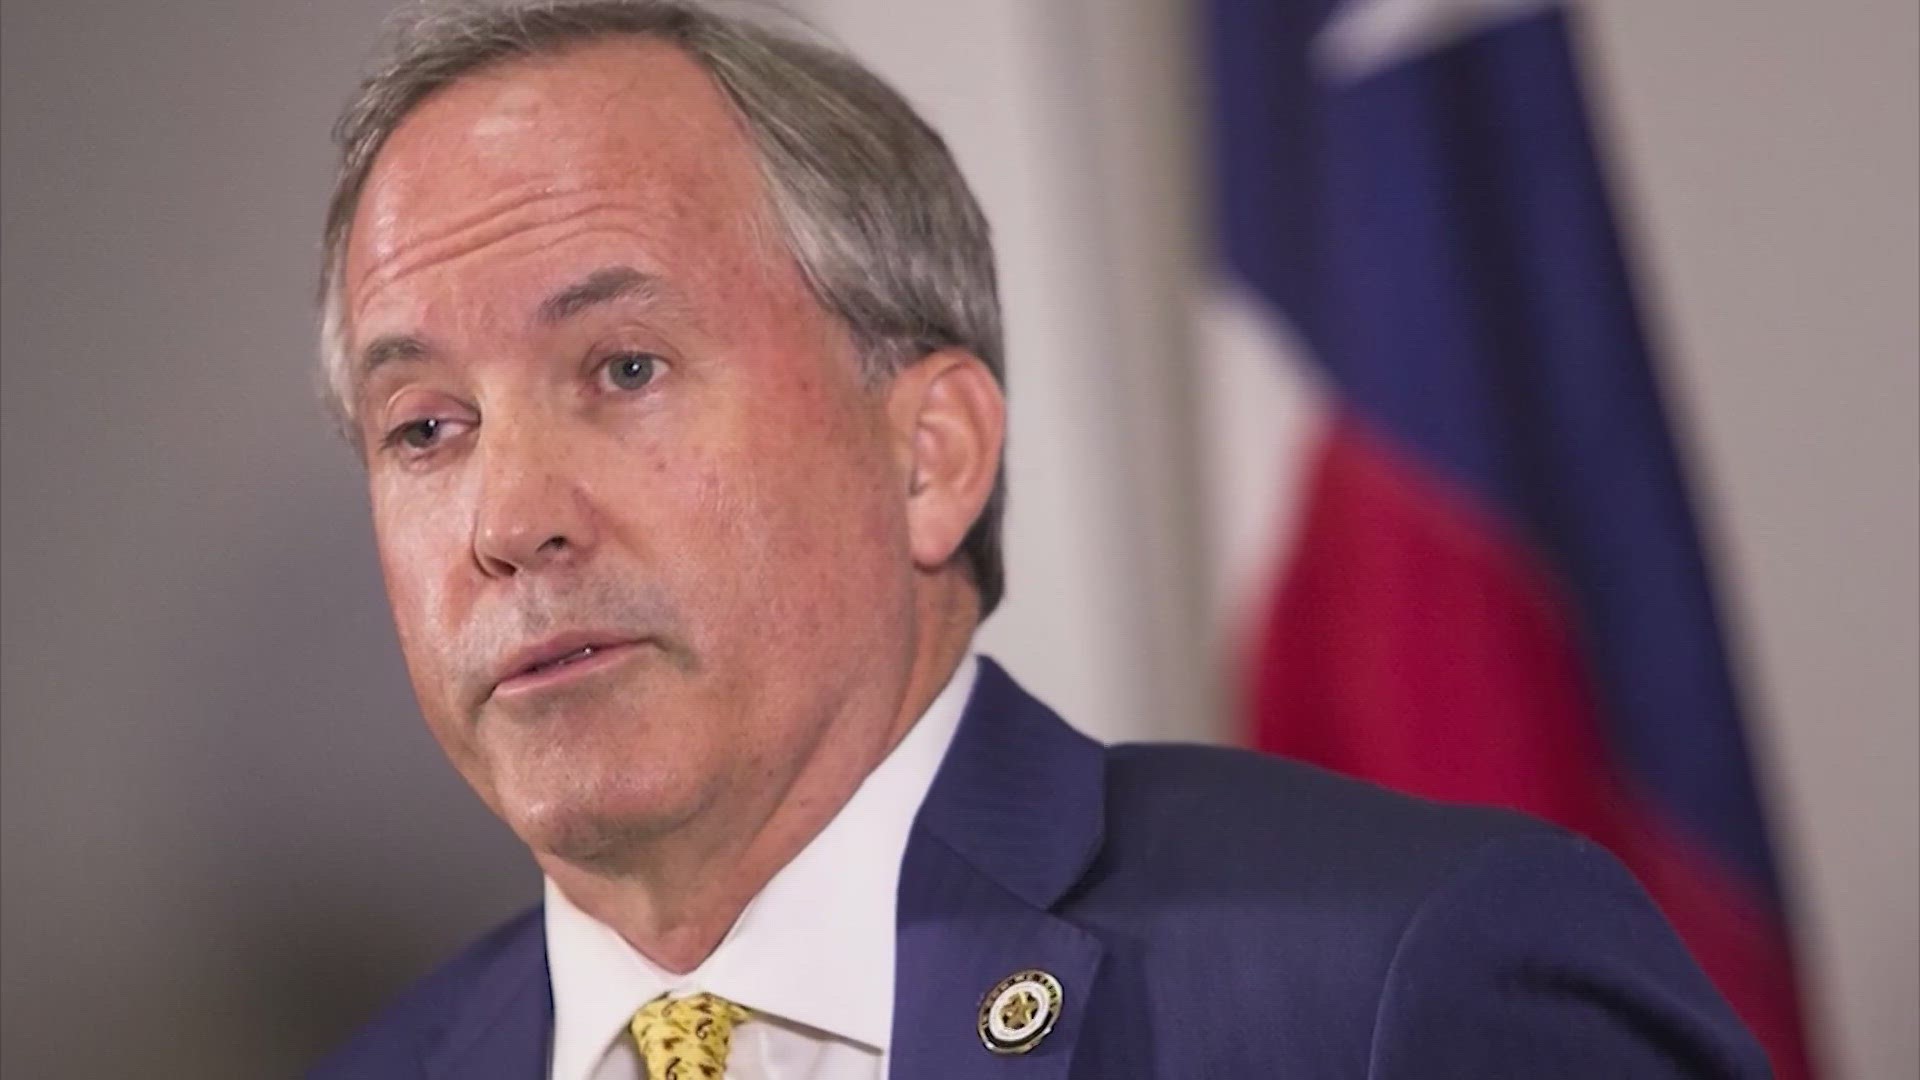 The vote triggers Paxton’s immediate suspension from office pending the outcome of a trial in the state Senate.